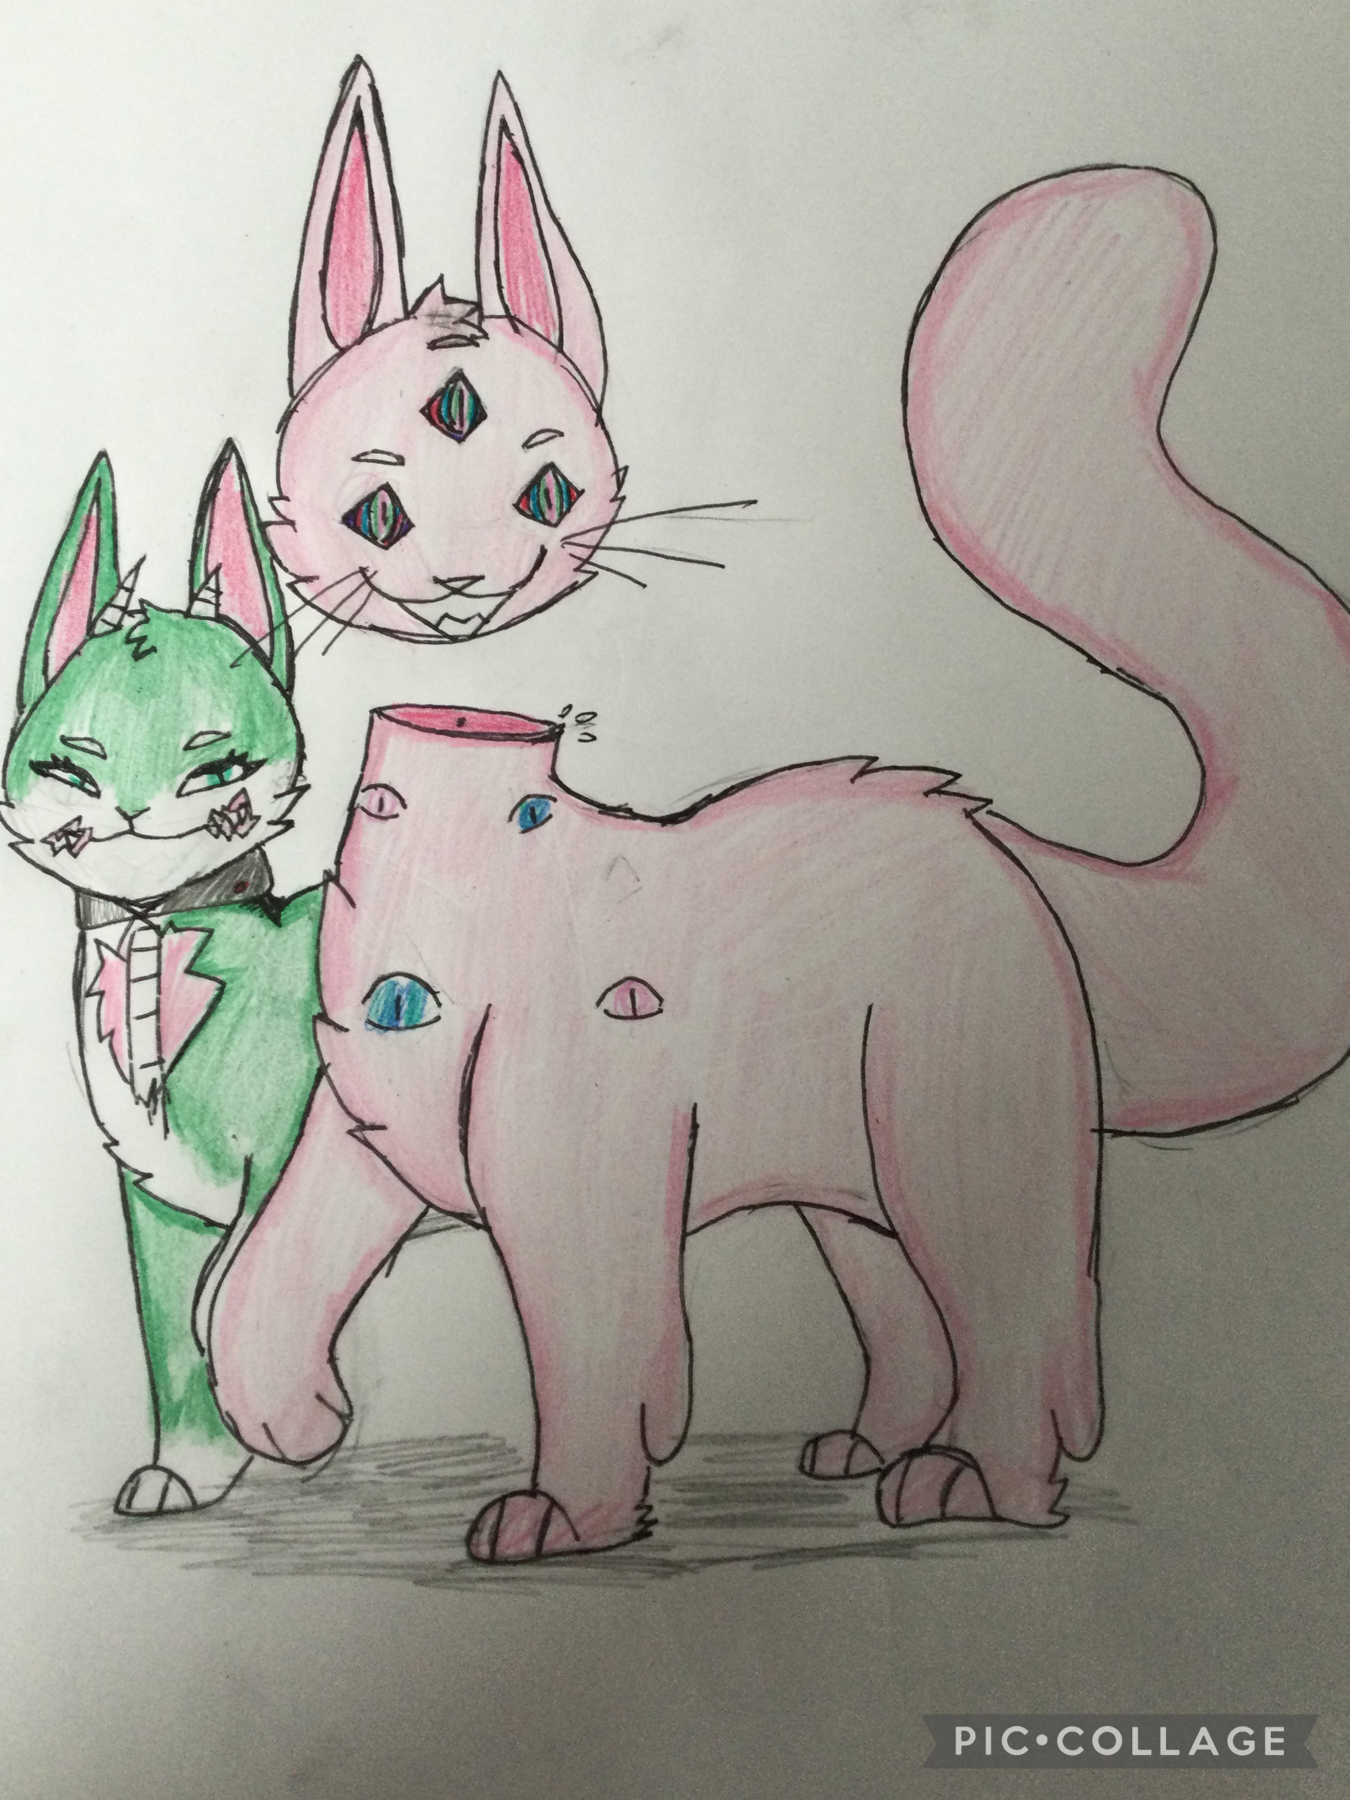 |tap| 
Ah it’s been awhile how is everyone. These two are old ocs I’ve never used but I thought it would be fun. The big cats name is Cain and the Green cats name is Hecate. Hecate is a zombie cat while Cain is idk a weird pink cat who’s crazy lol. They a